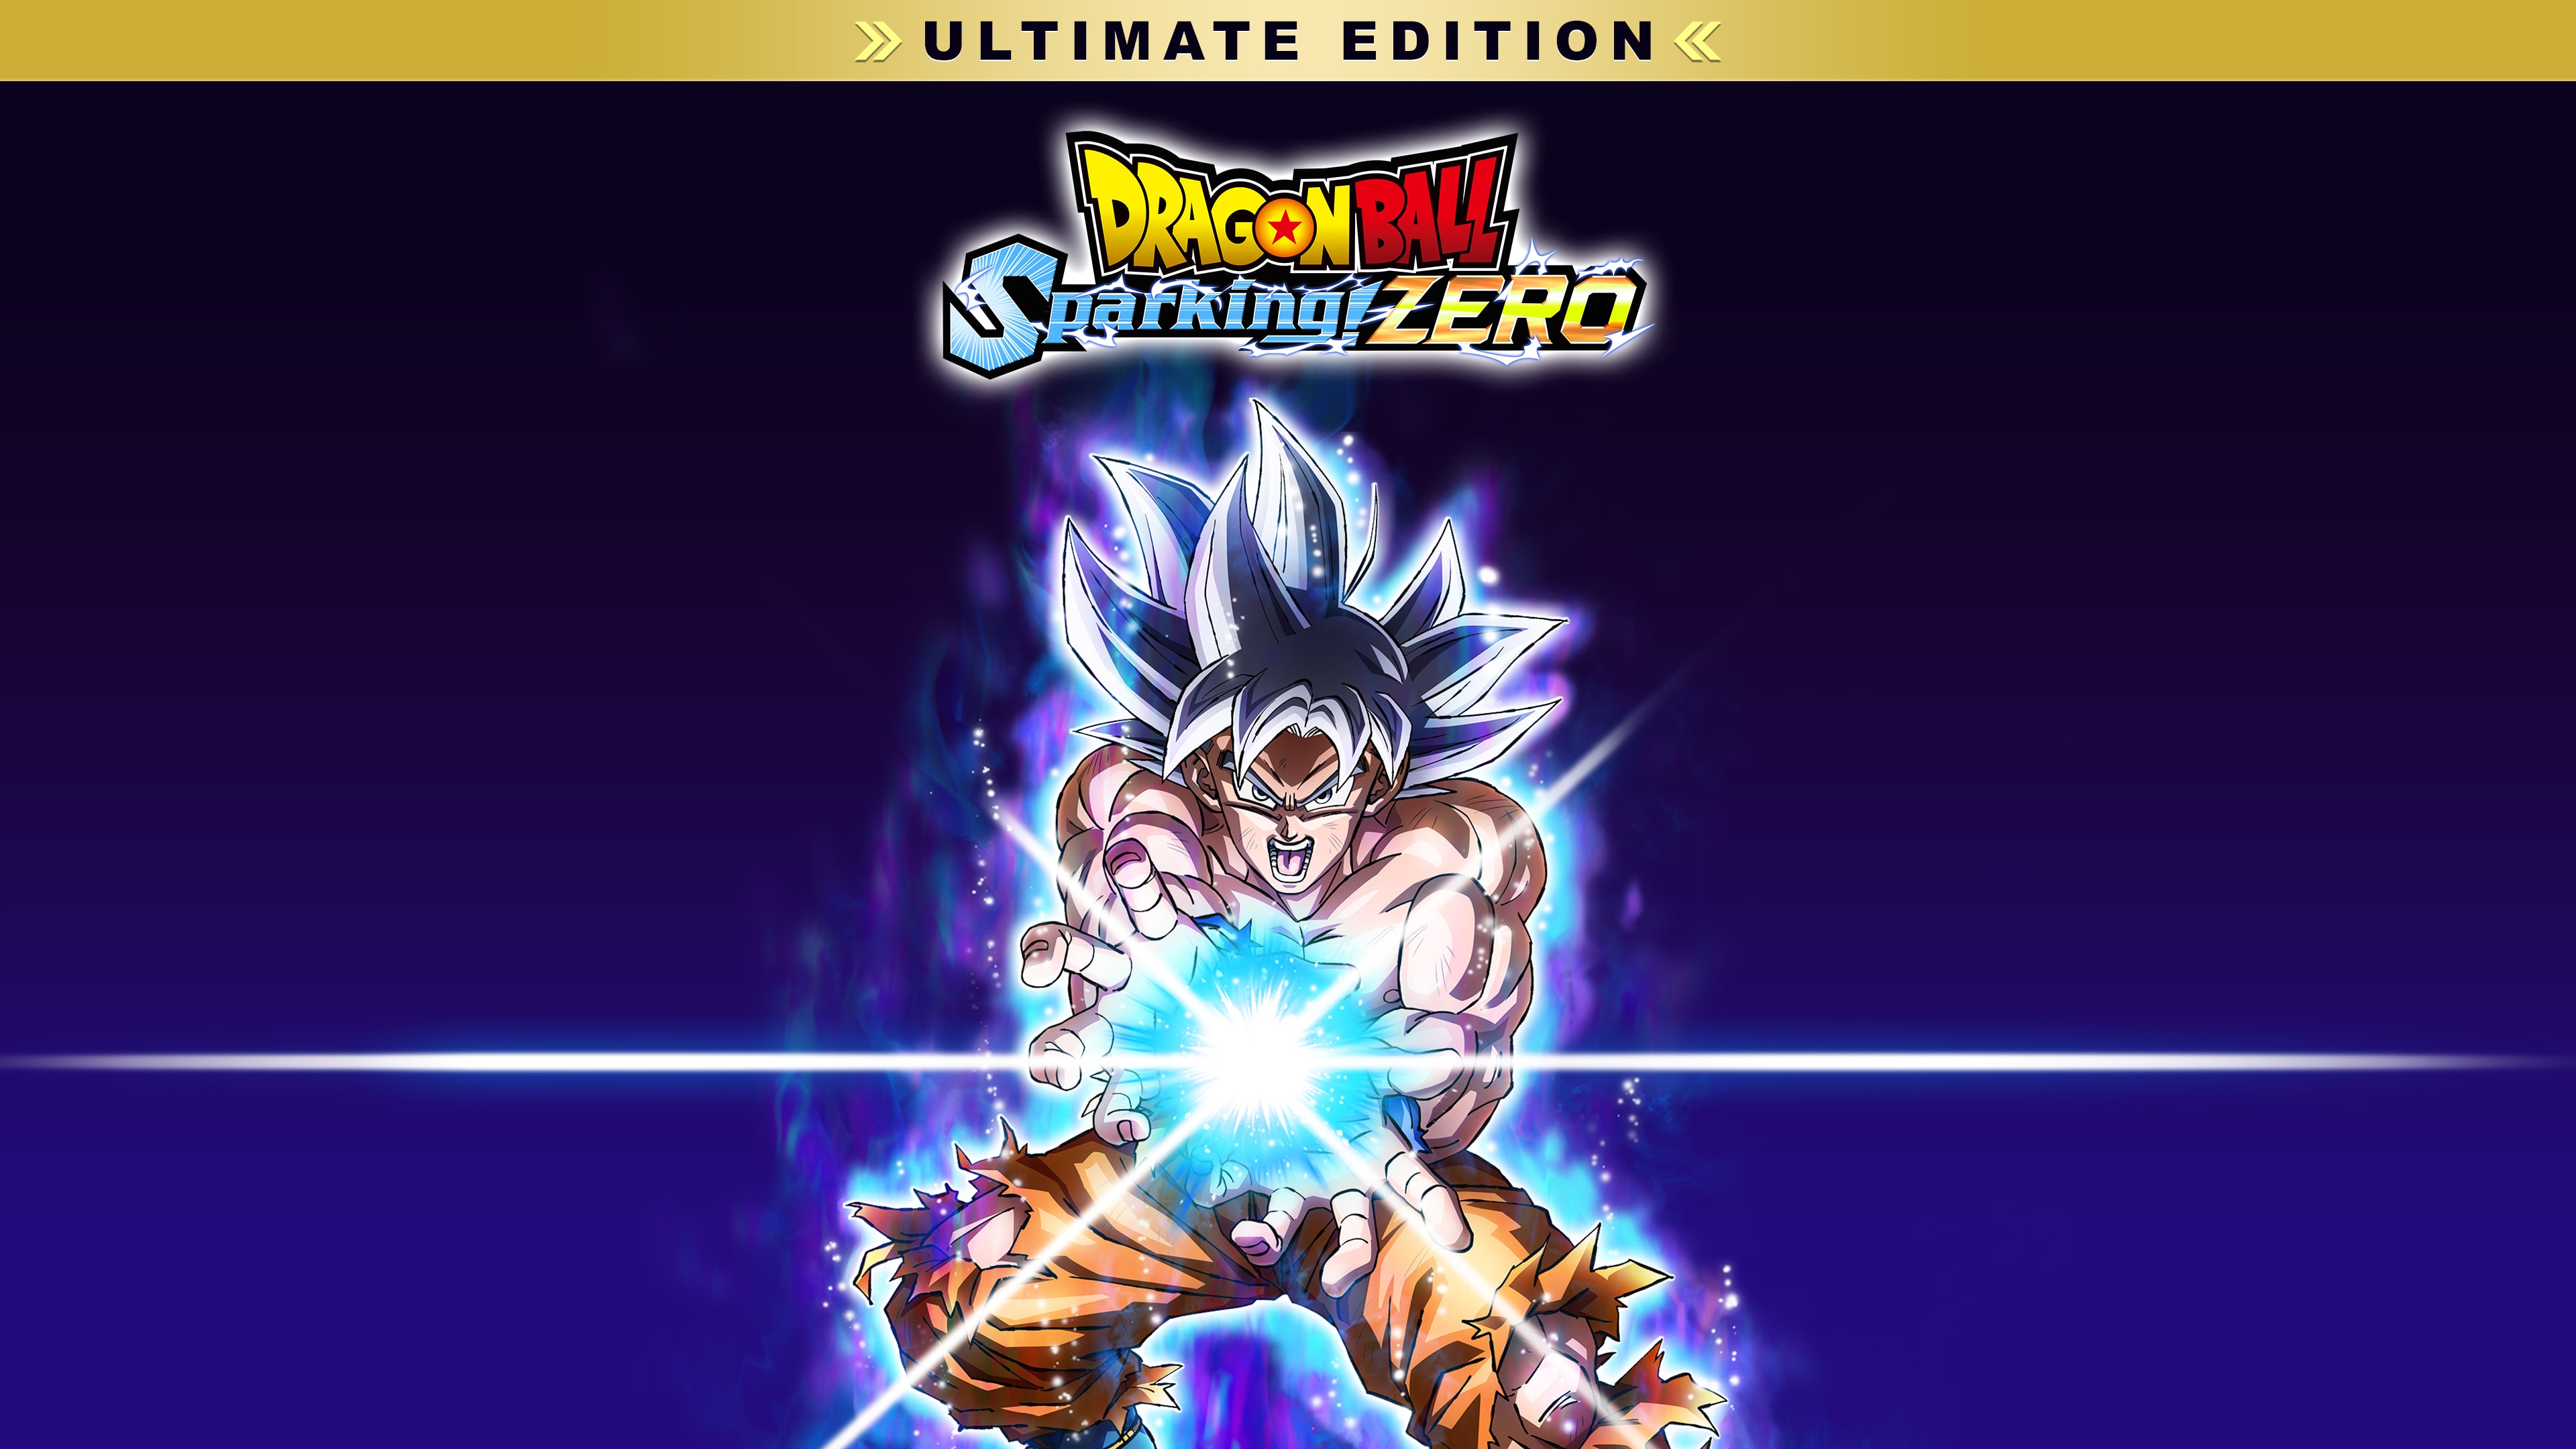 Ultimate Edition